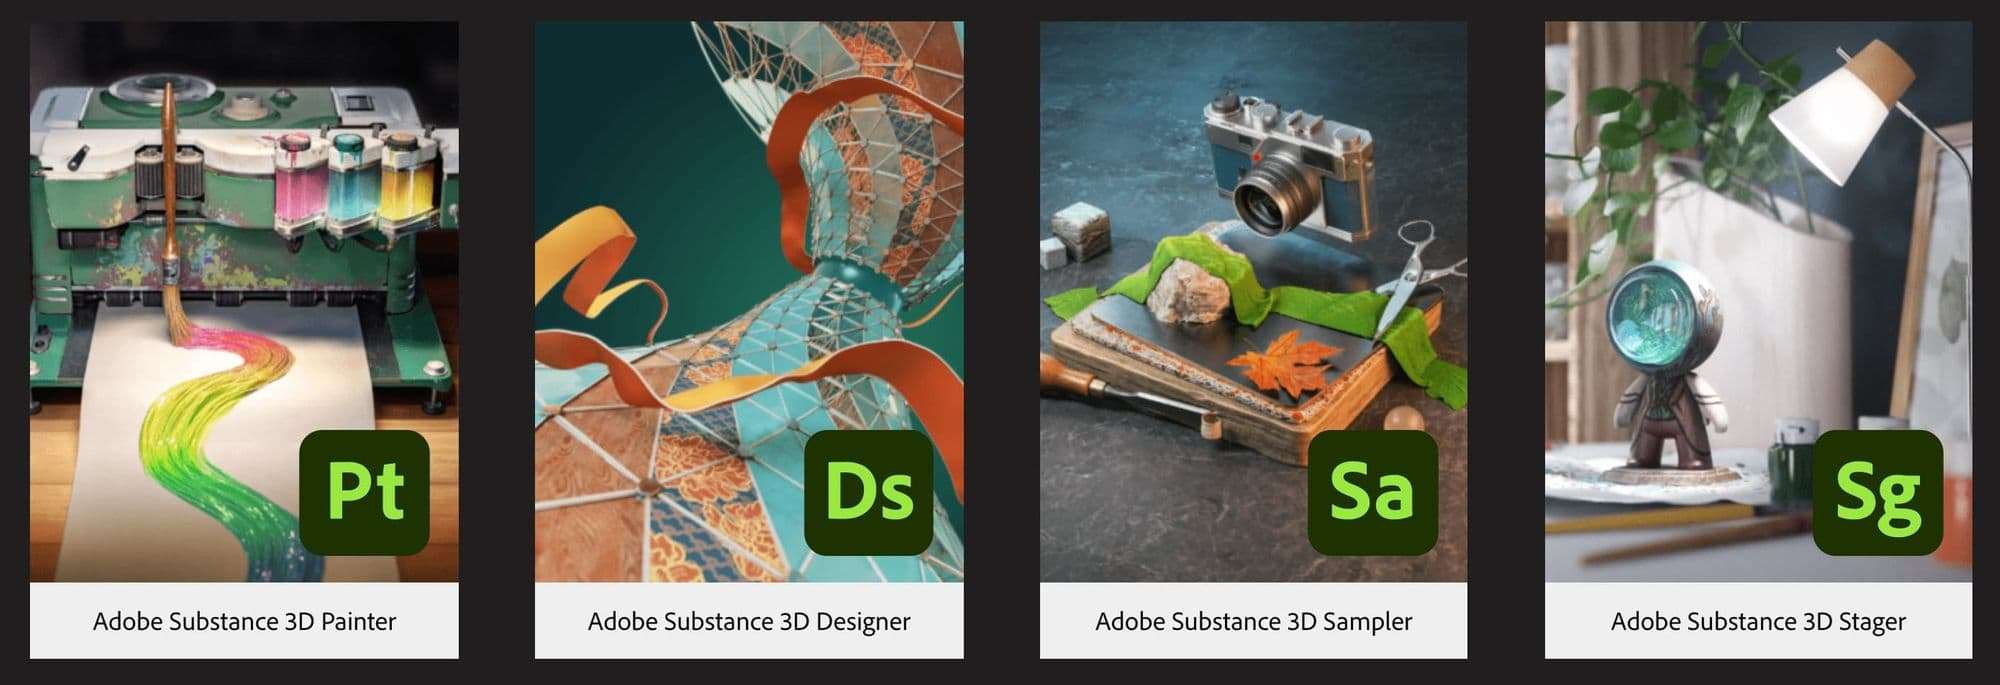 for ios download Adobe Substance 3D Stager 2.1.0.5587